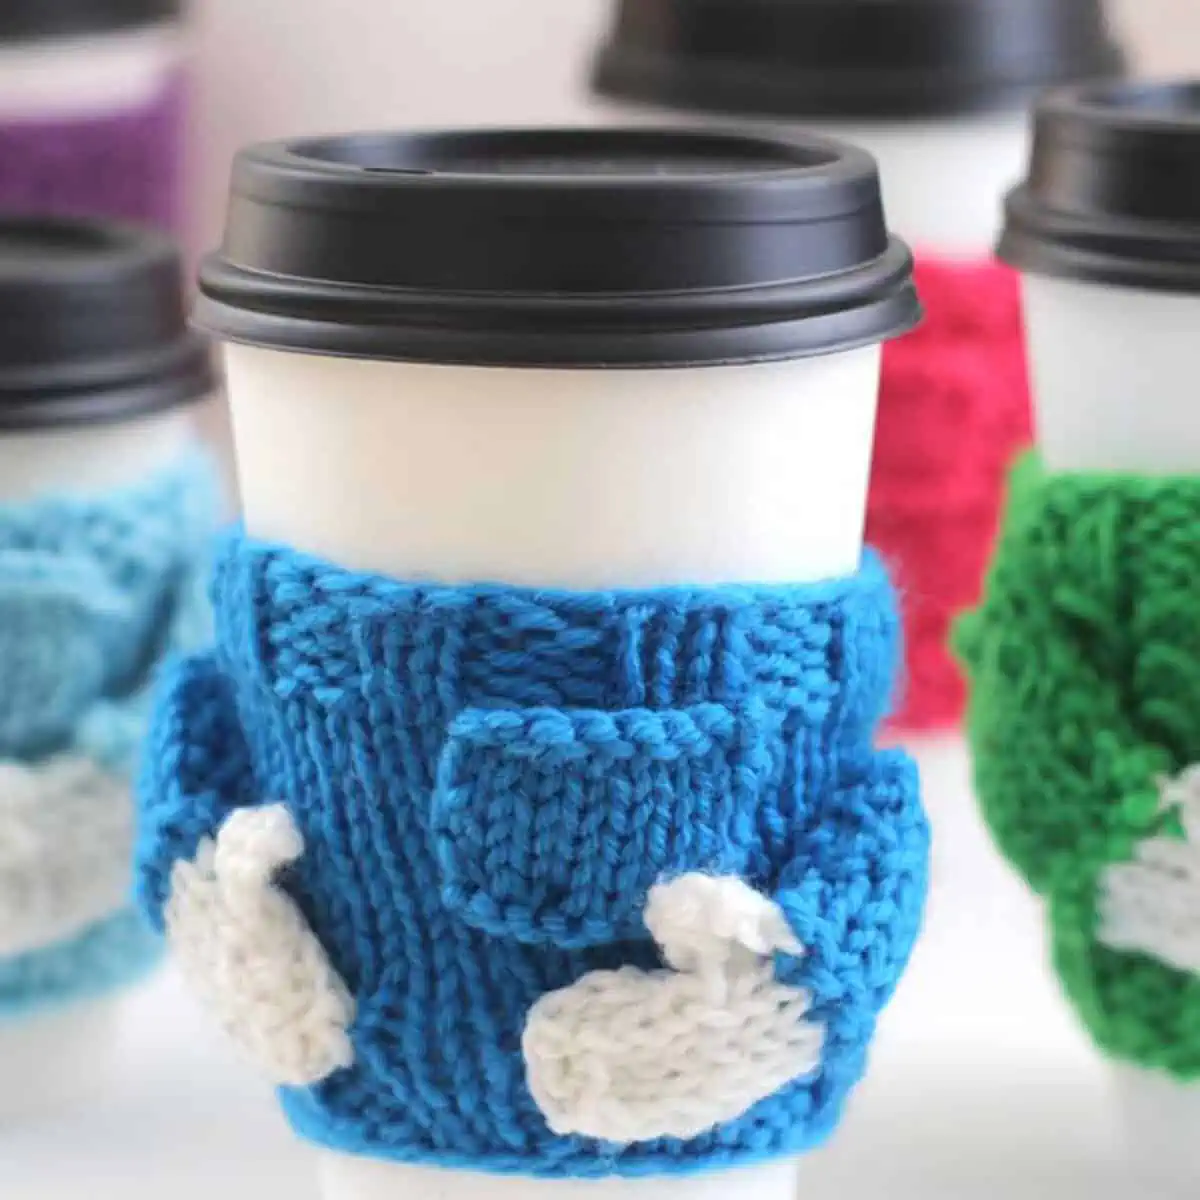 Knitted Coffee Cozy in sweater shape with blue yarn color.